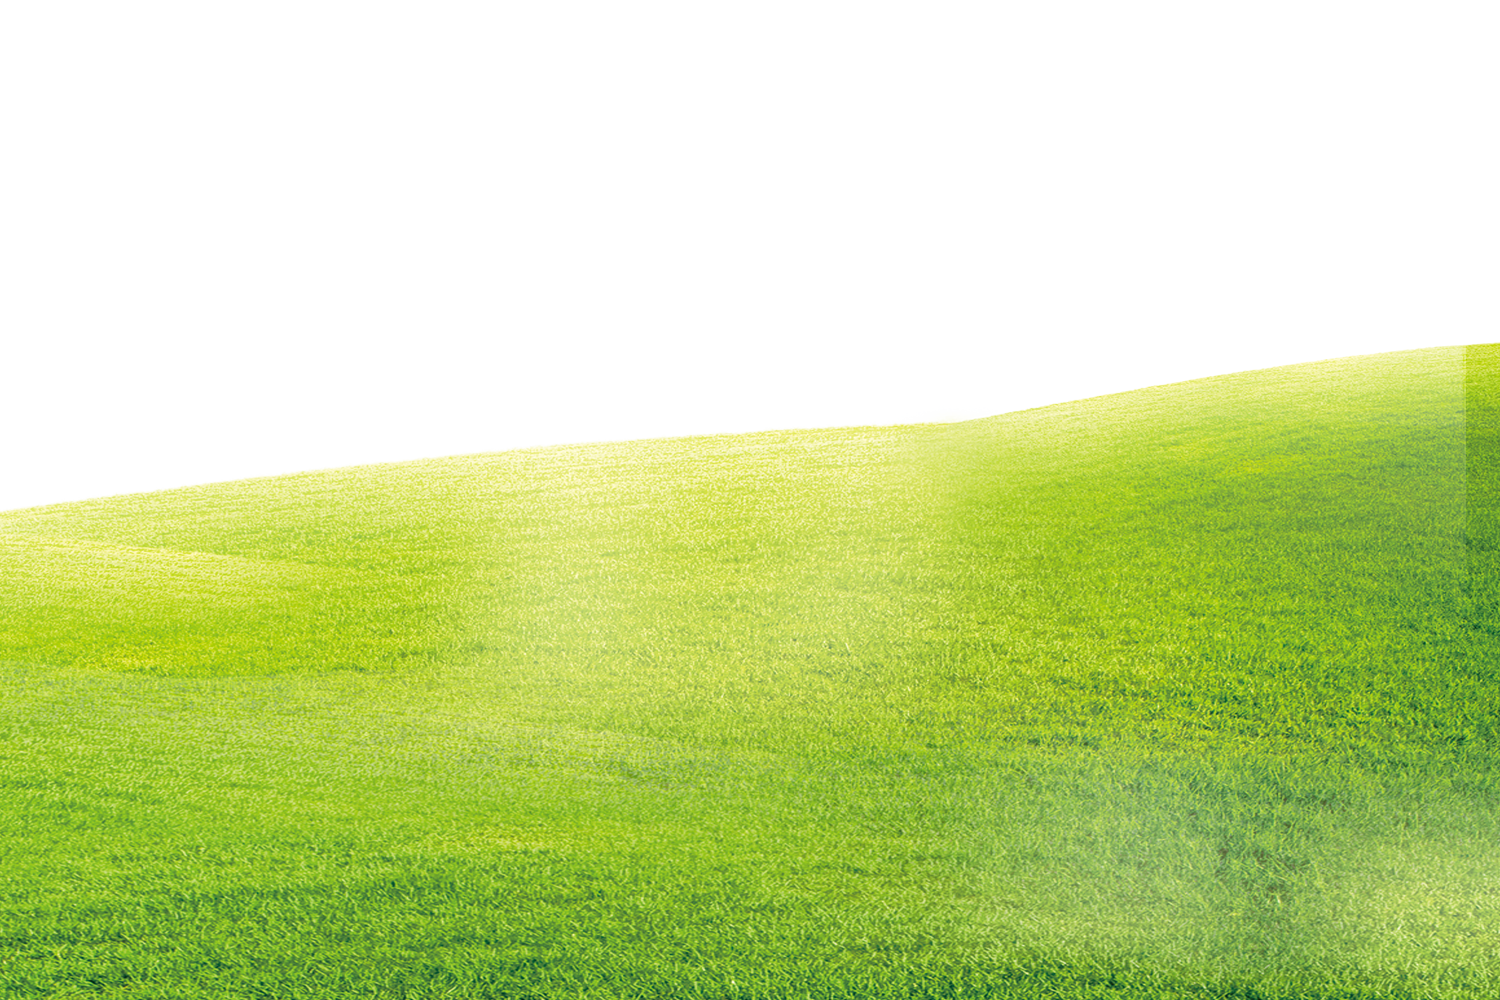 Green Grass Background png download - 829*1280 - Free Transparent